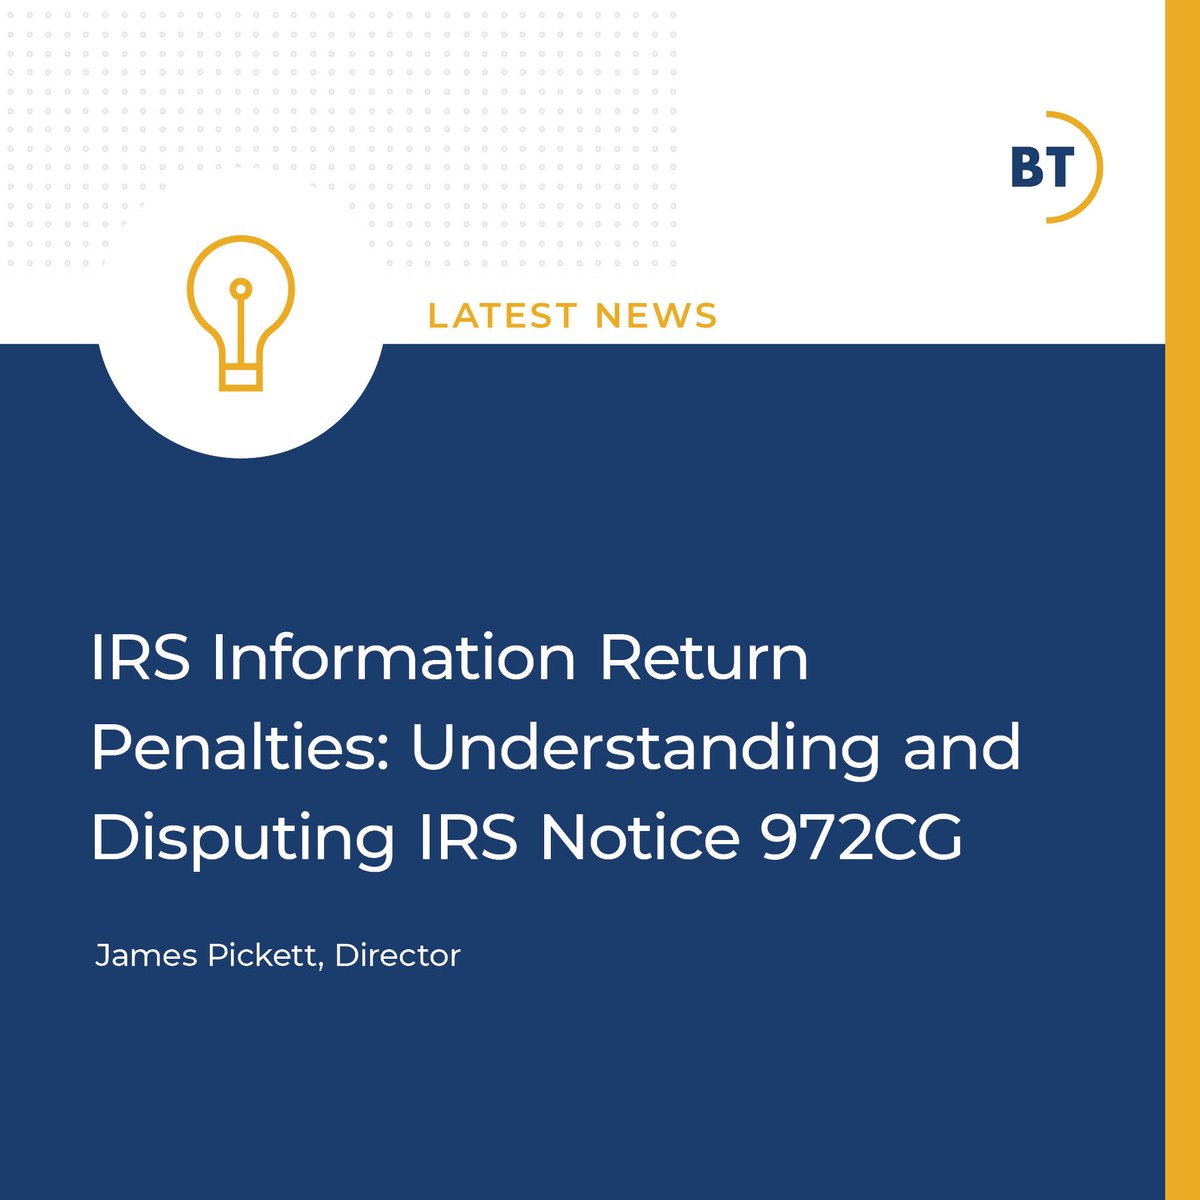 The IRS considers information return penalties an important tool to collect the proper amount of tax revenue. In his latest article, James Pickett, Director of our firm's Tax Controversy practice, discusses these notices and how best to respond to them: hubs.la/Q01xH9xS0